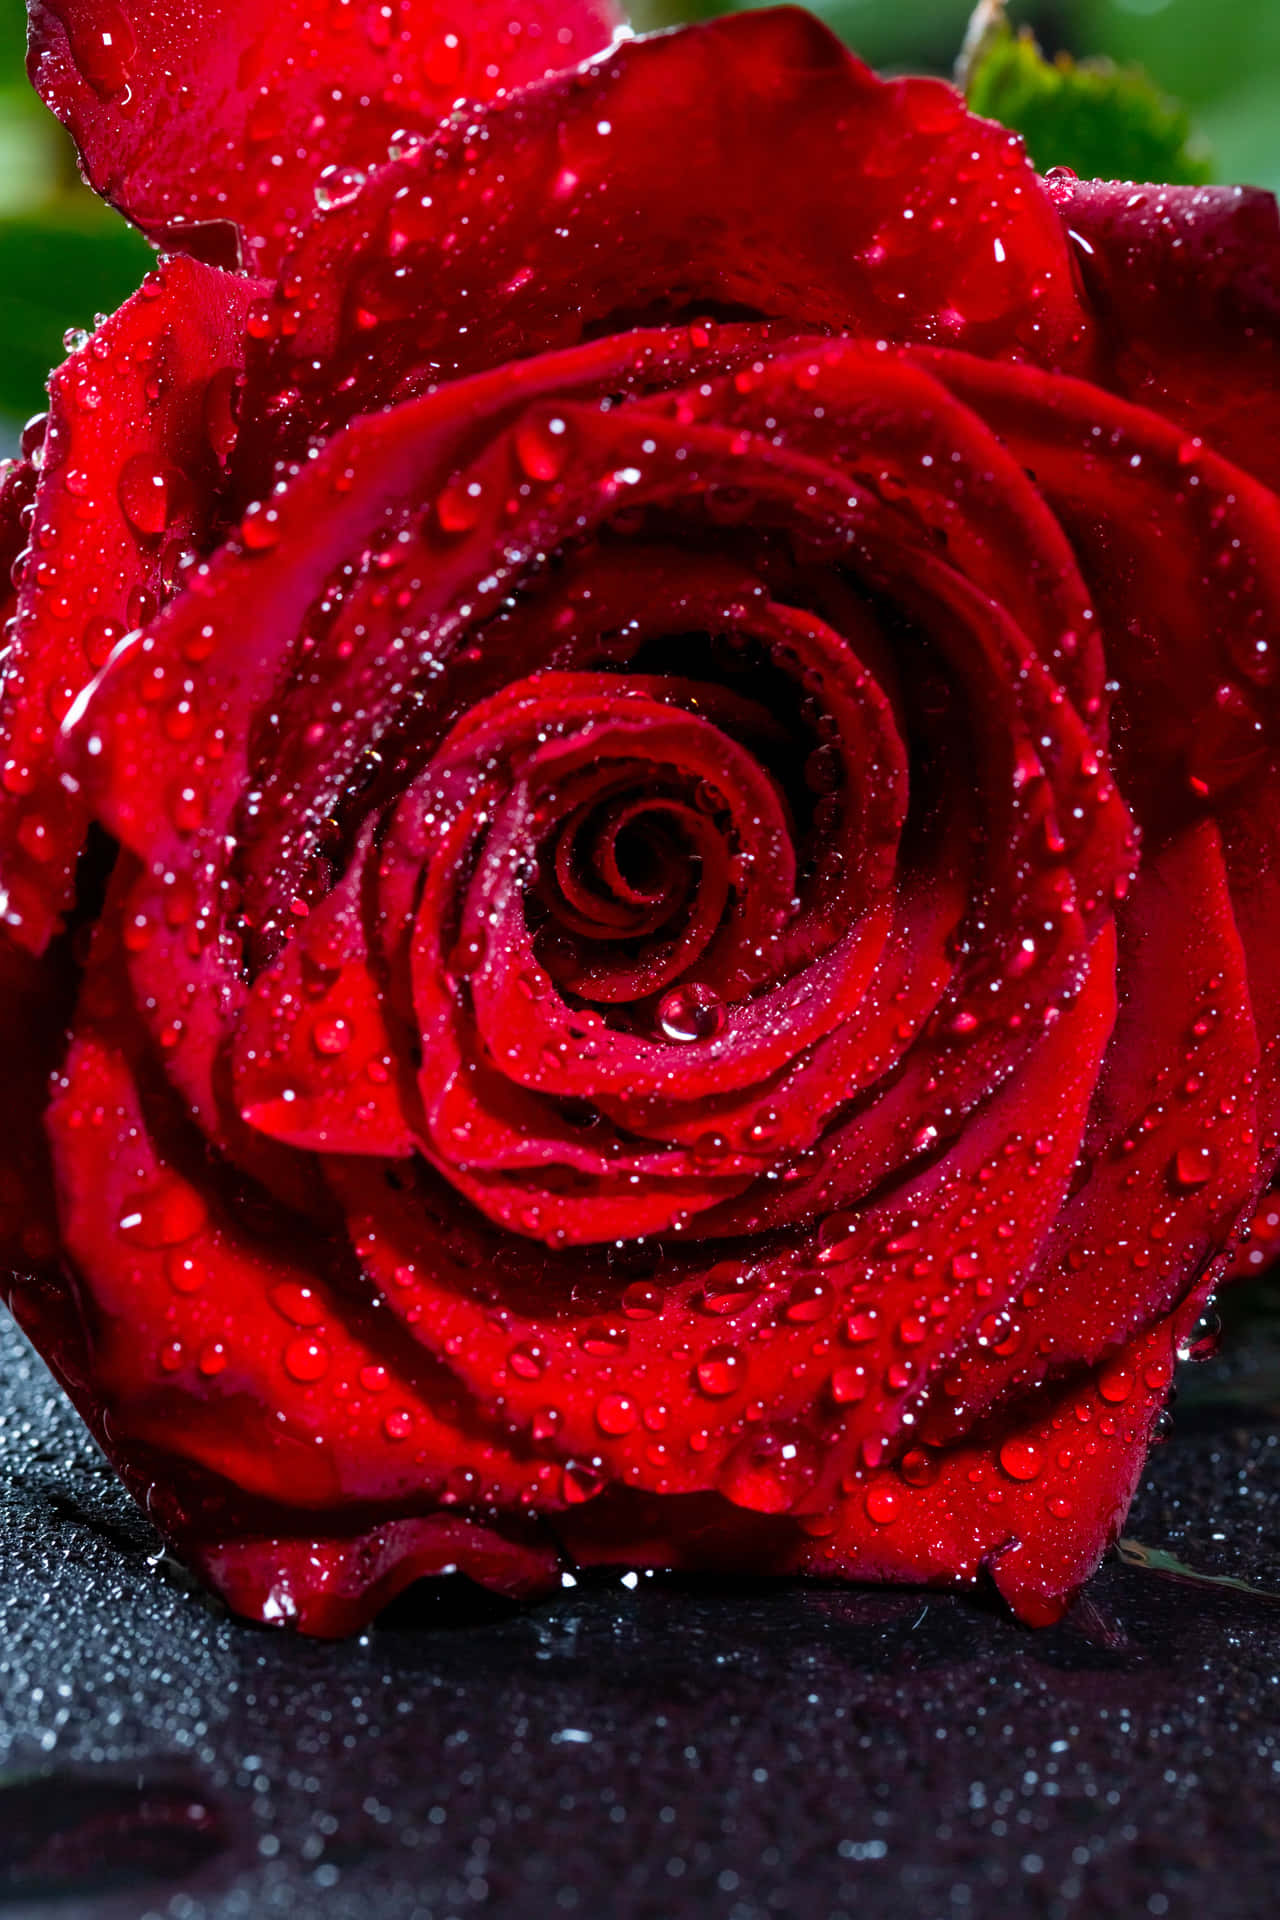 A Rose is a Symbol of Love and Beauty